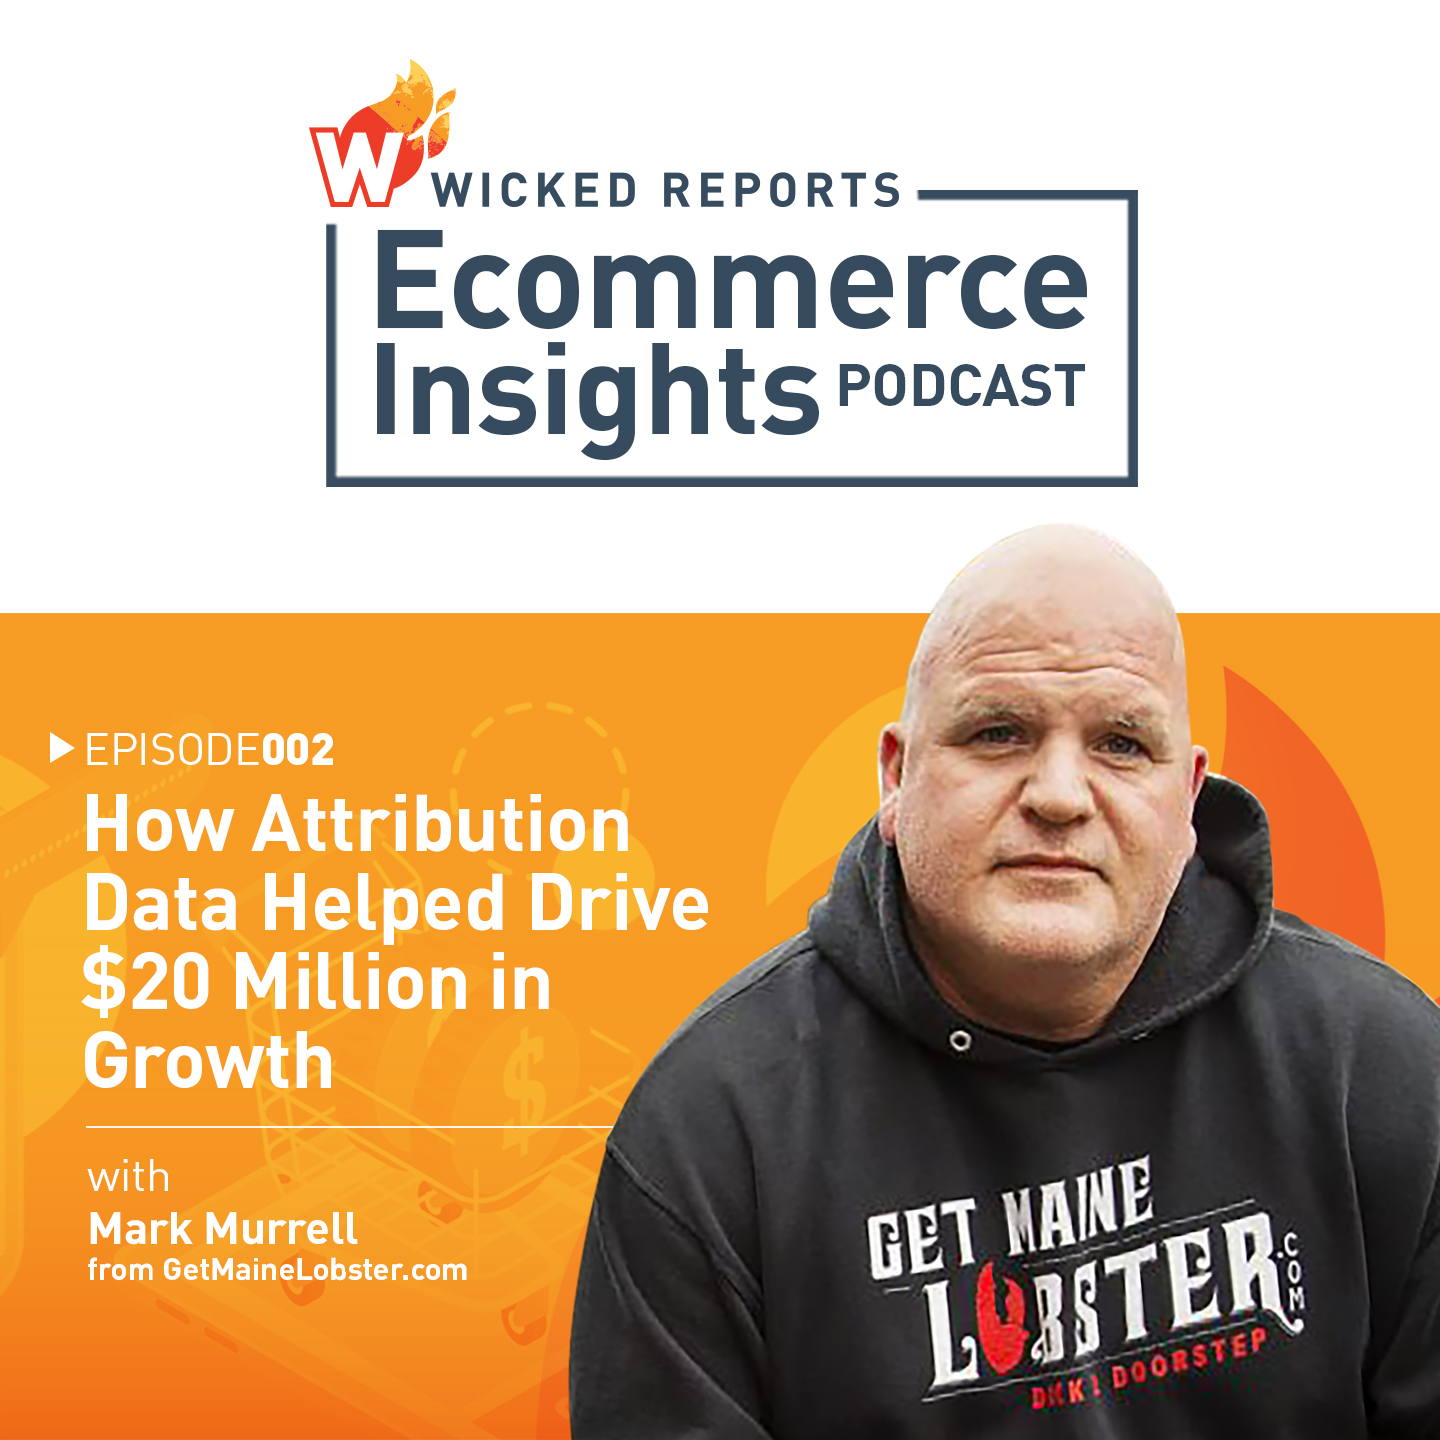 How Attribution Data Helped Drive $20 Million in Growth with Mark Murrell